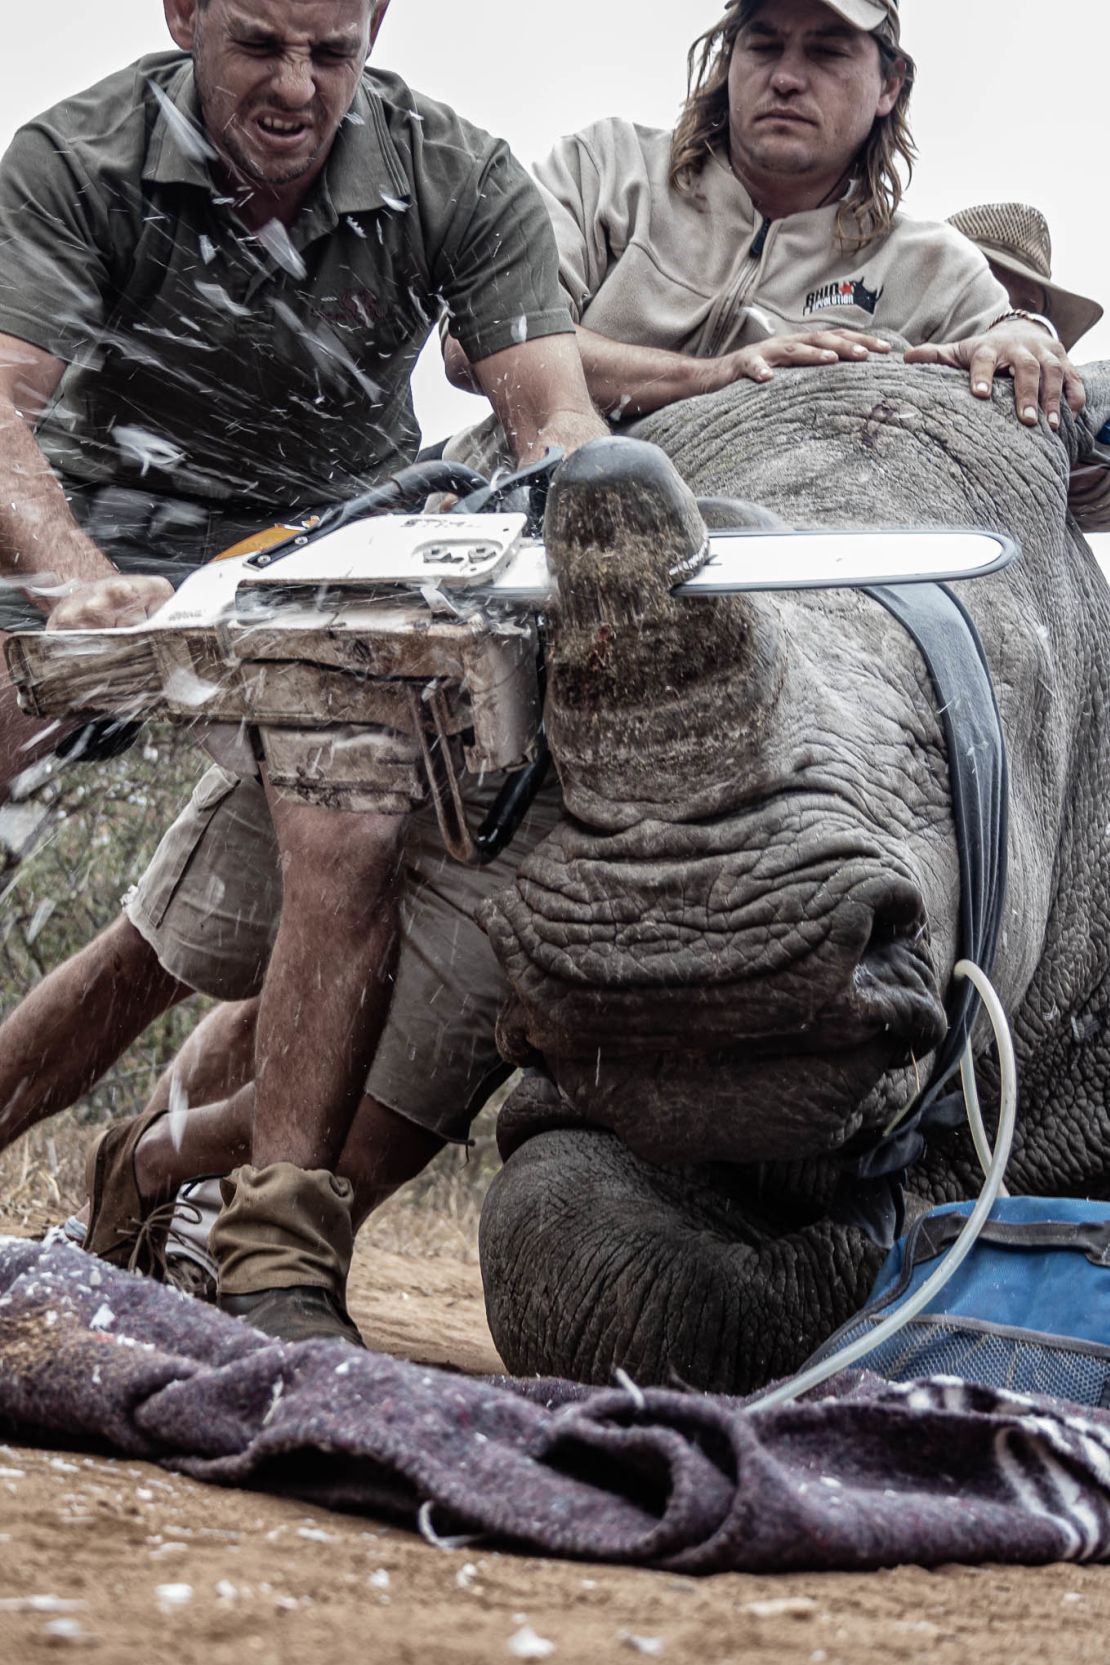 Neville Kgaugelo Ngomane's winning photo. A rhino being dehorned in an attempt to protect it from being poached